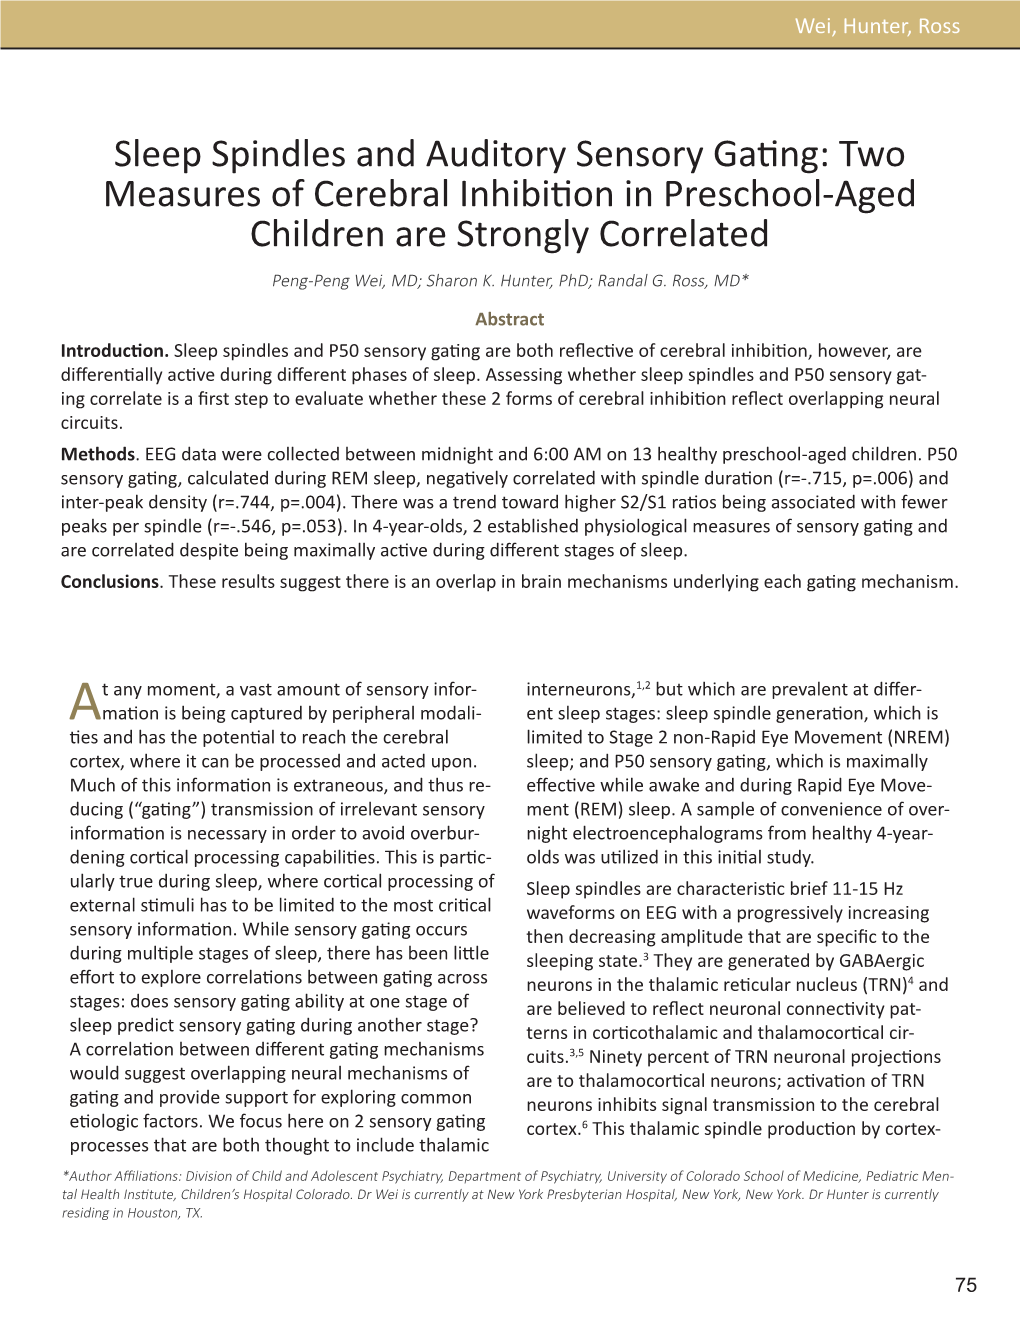 Sleep Spindles and Auditory Sensory Gating: Two Measures of Cerebral Inhibition in Preschool-Aged Children Are Strongly Correlated Peng-Peng Wei, MD; Sharon K